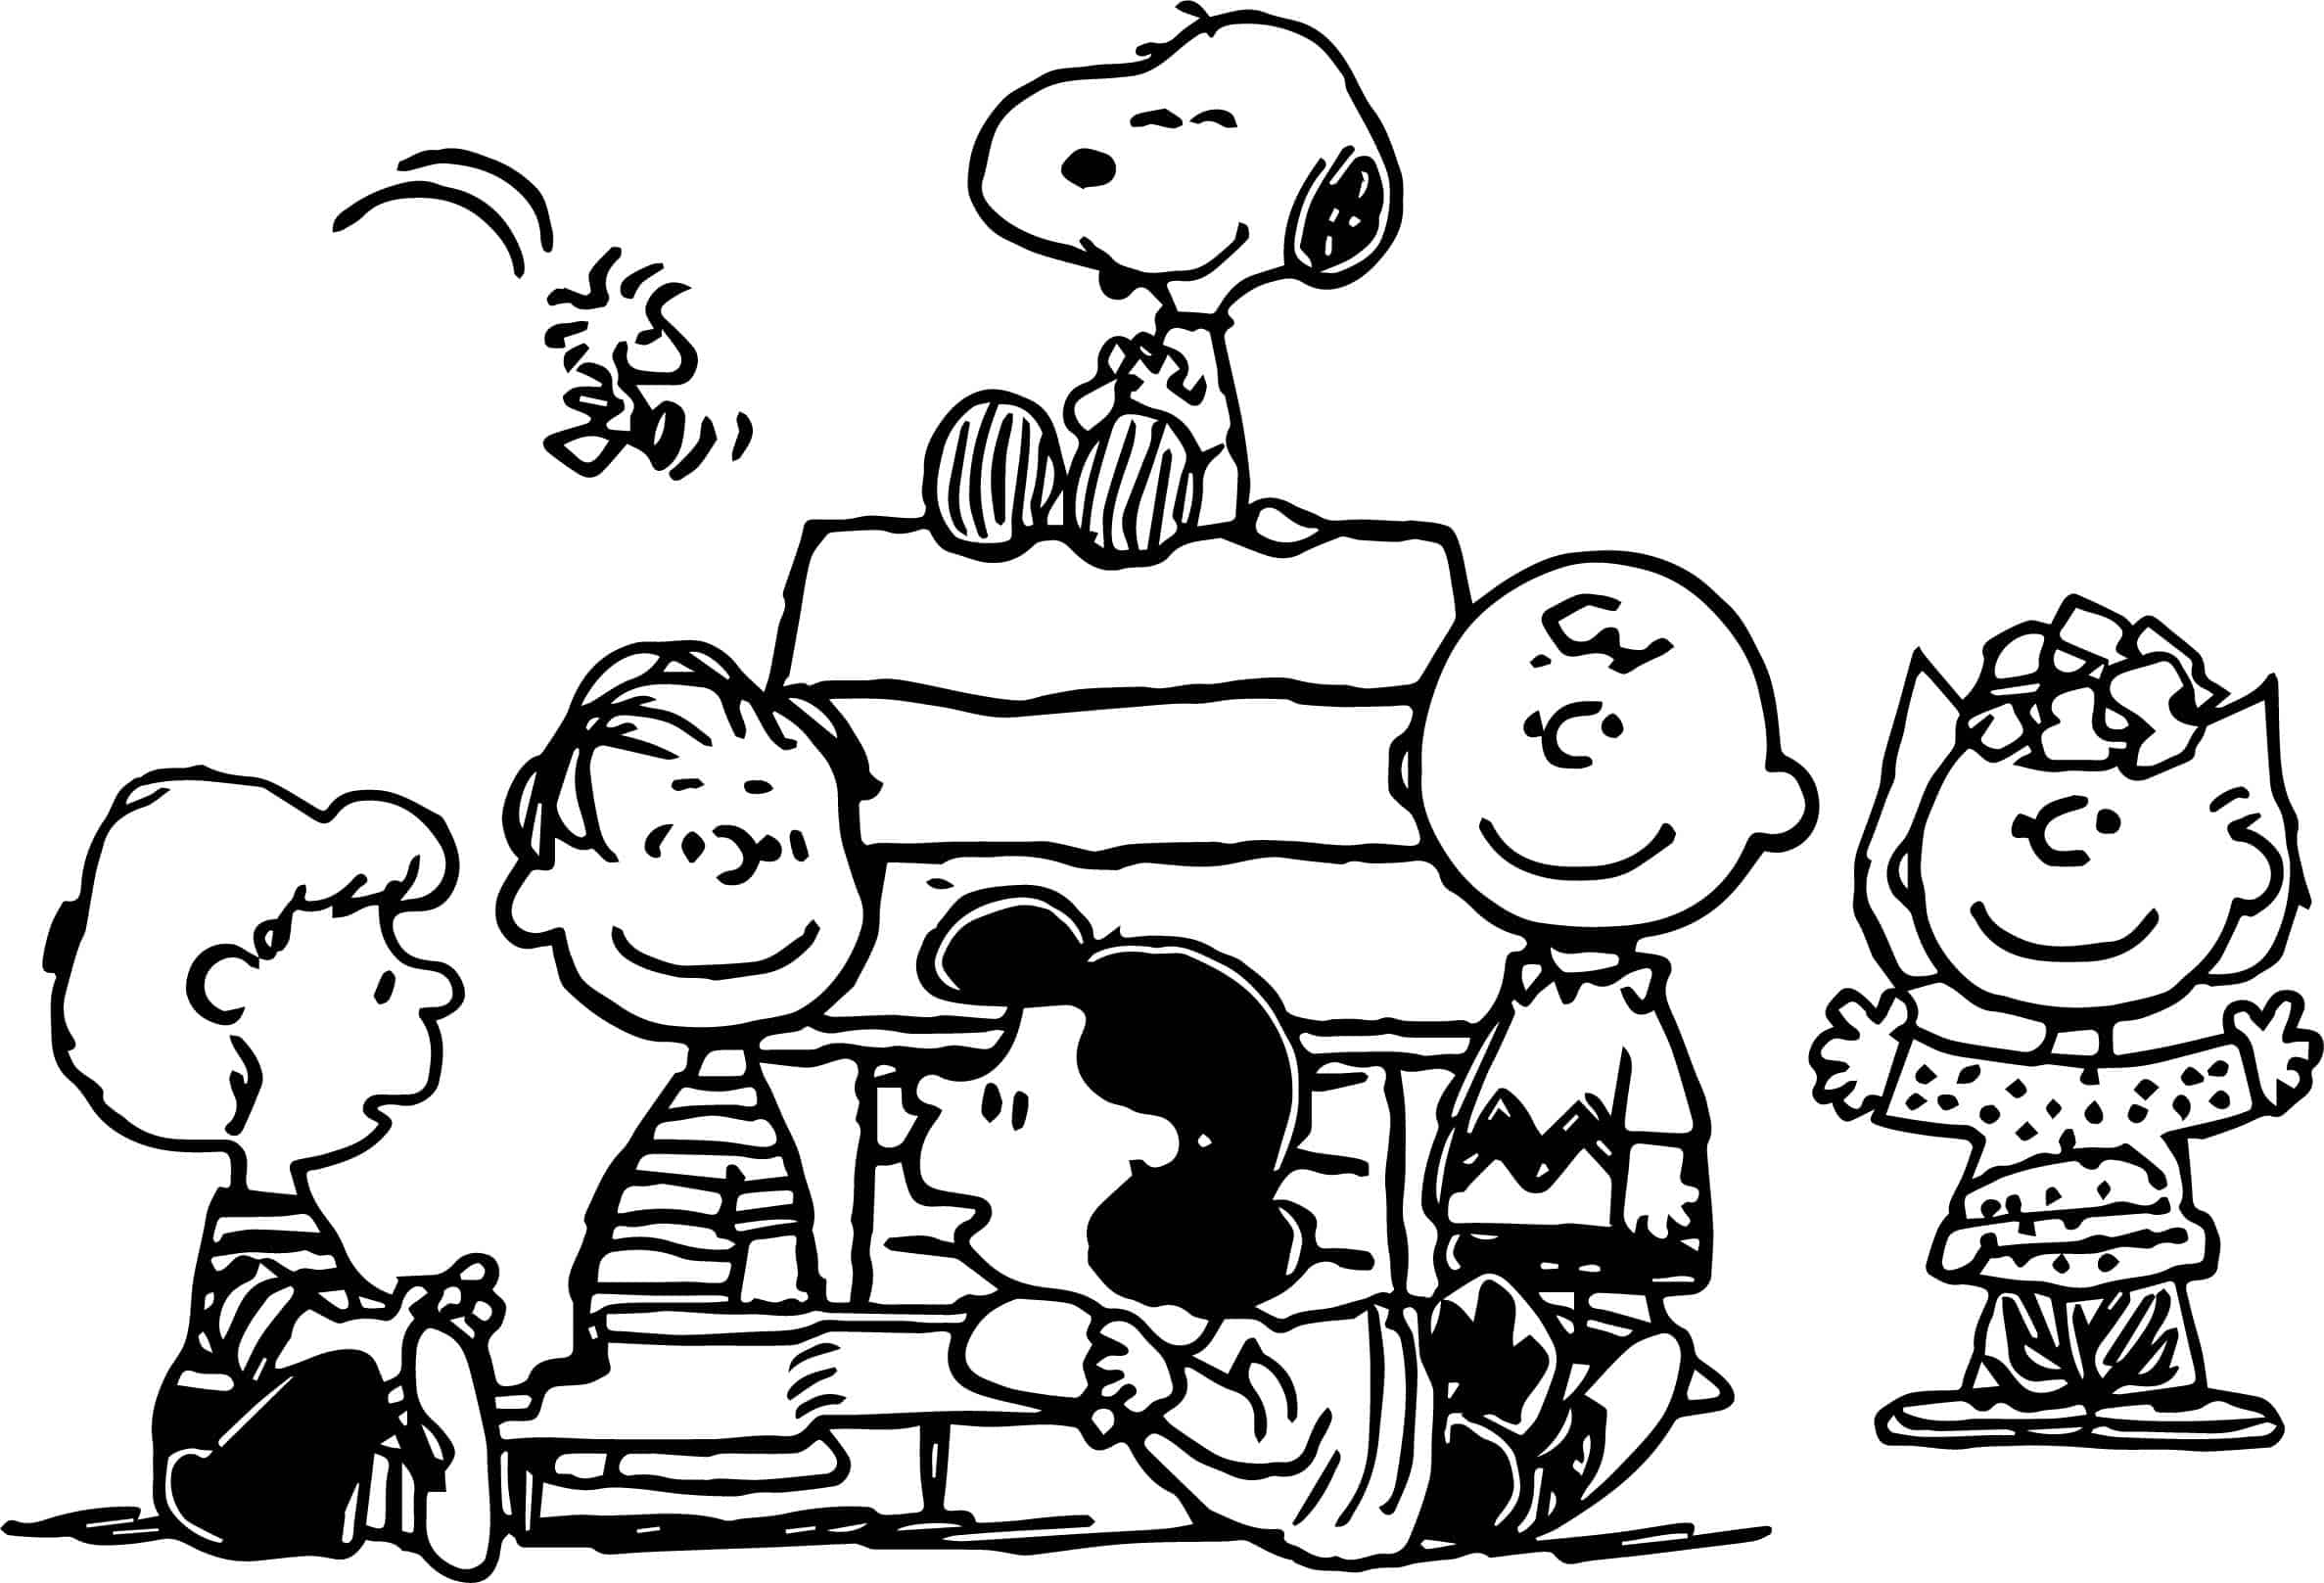 891 Cartoon Peanuts Coloring Pages for Kids